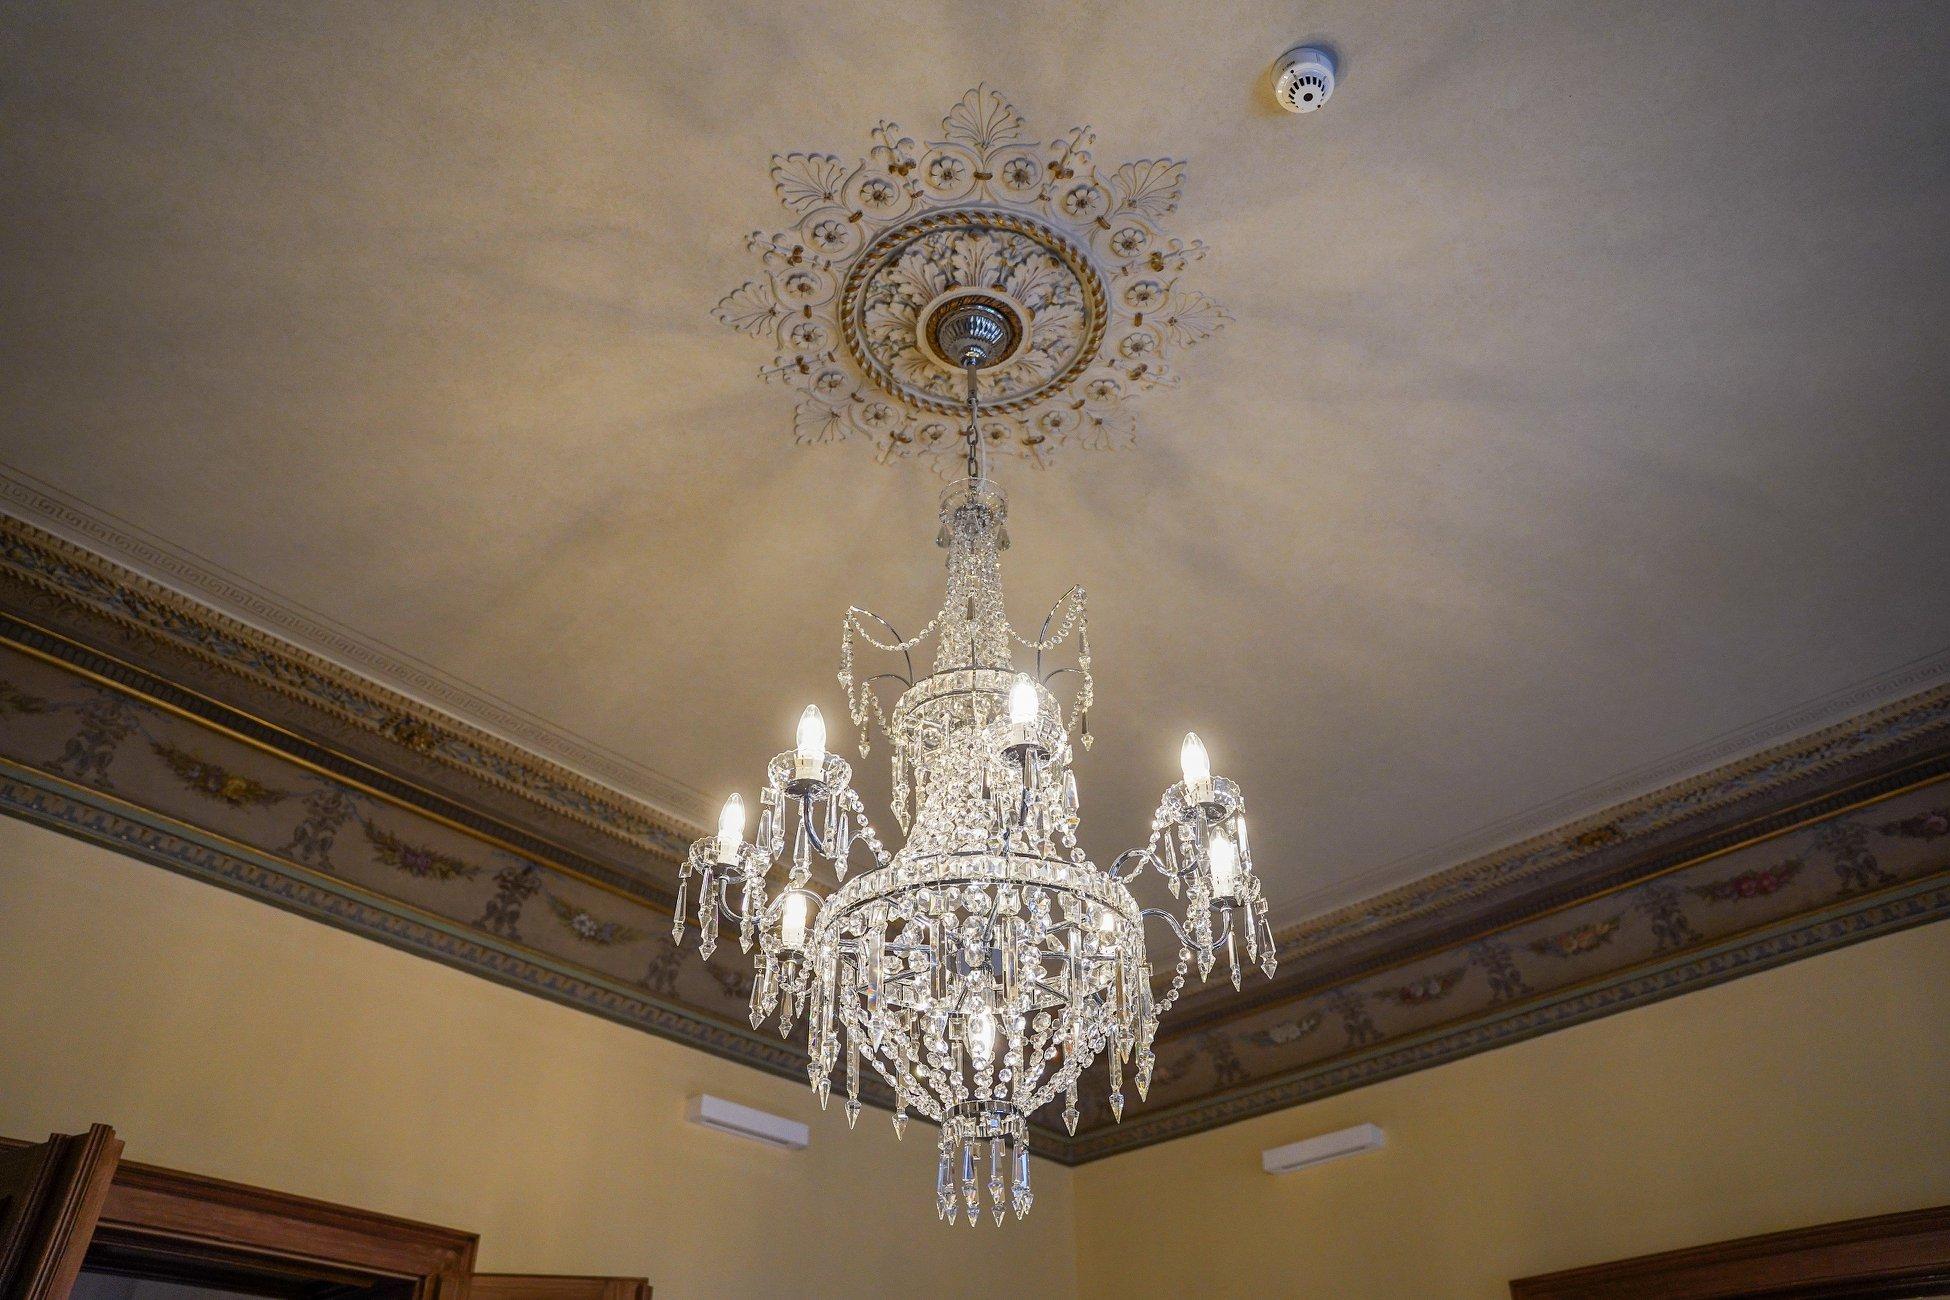 Obrázek v galerii pro Guided tour about the restoration of chandeliers in Liebieg Palace